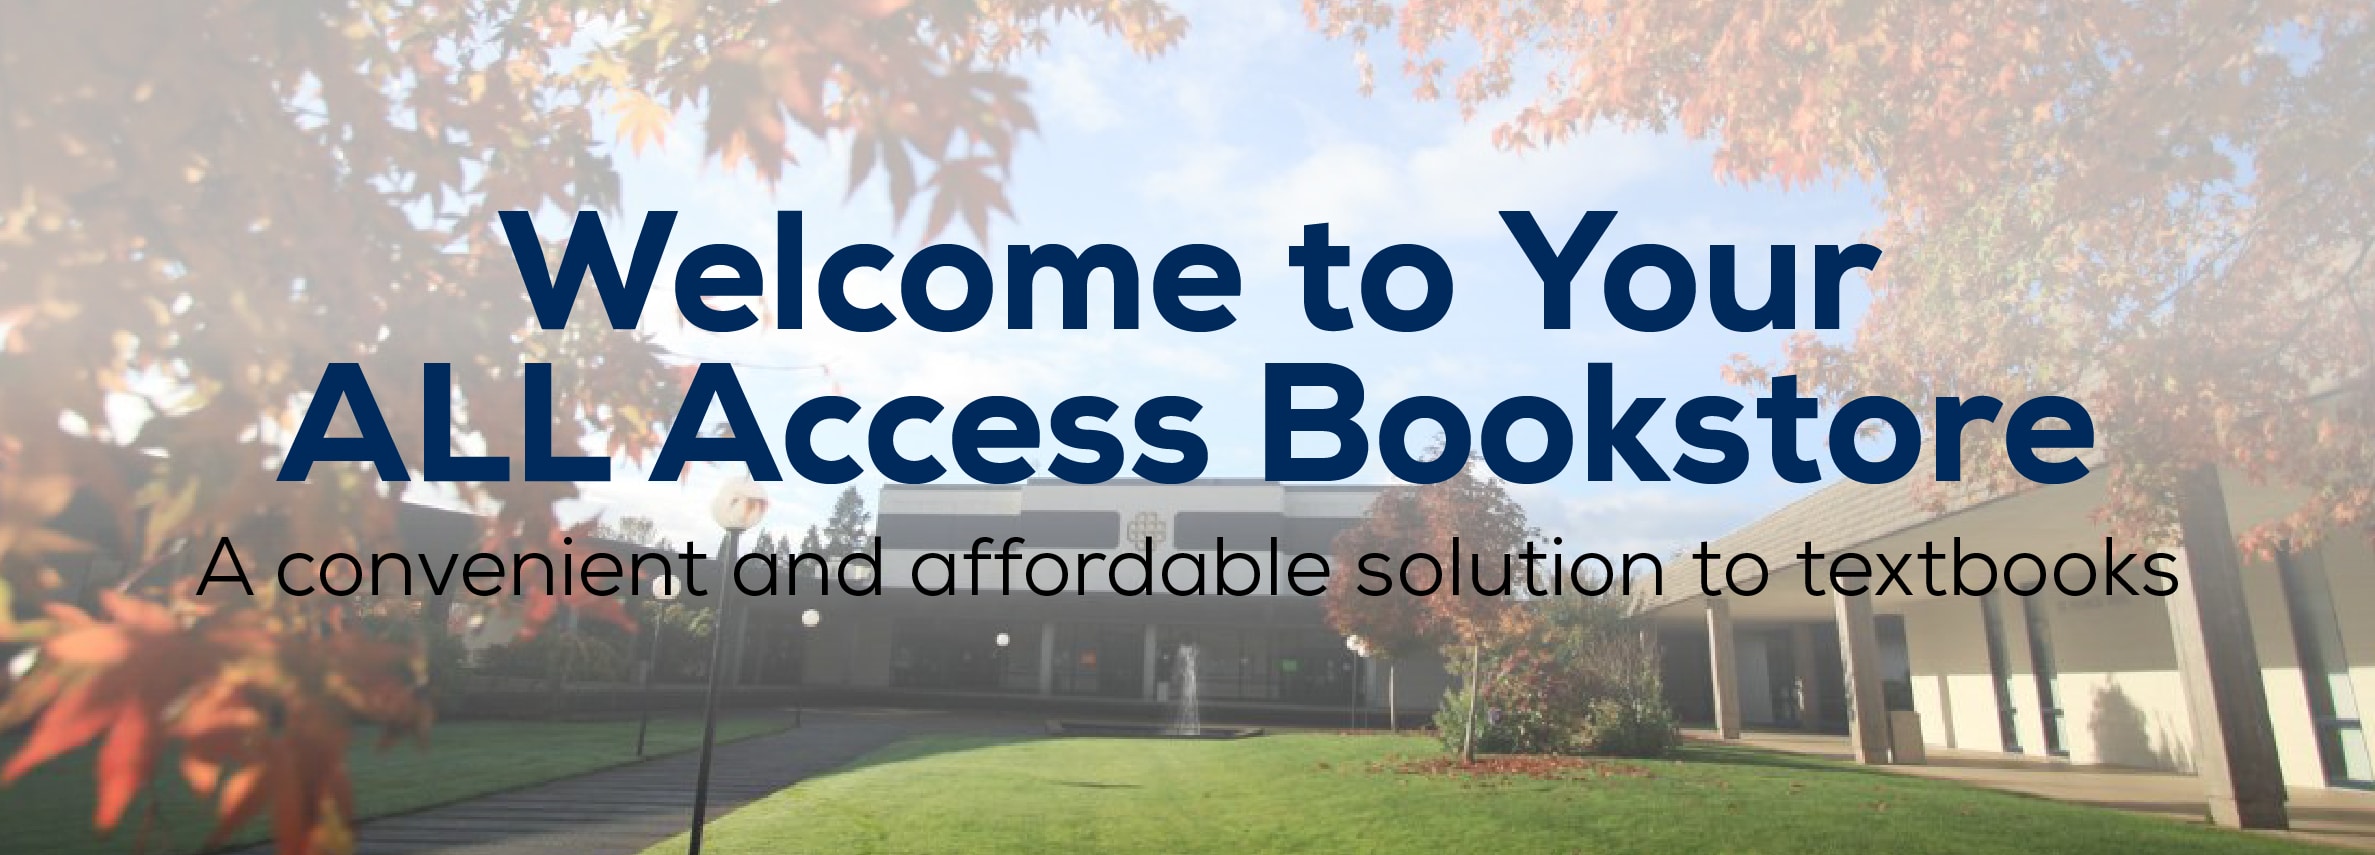 Welcome to Your ALL Access Bookstore. A convenient and affordable solution to textbooks